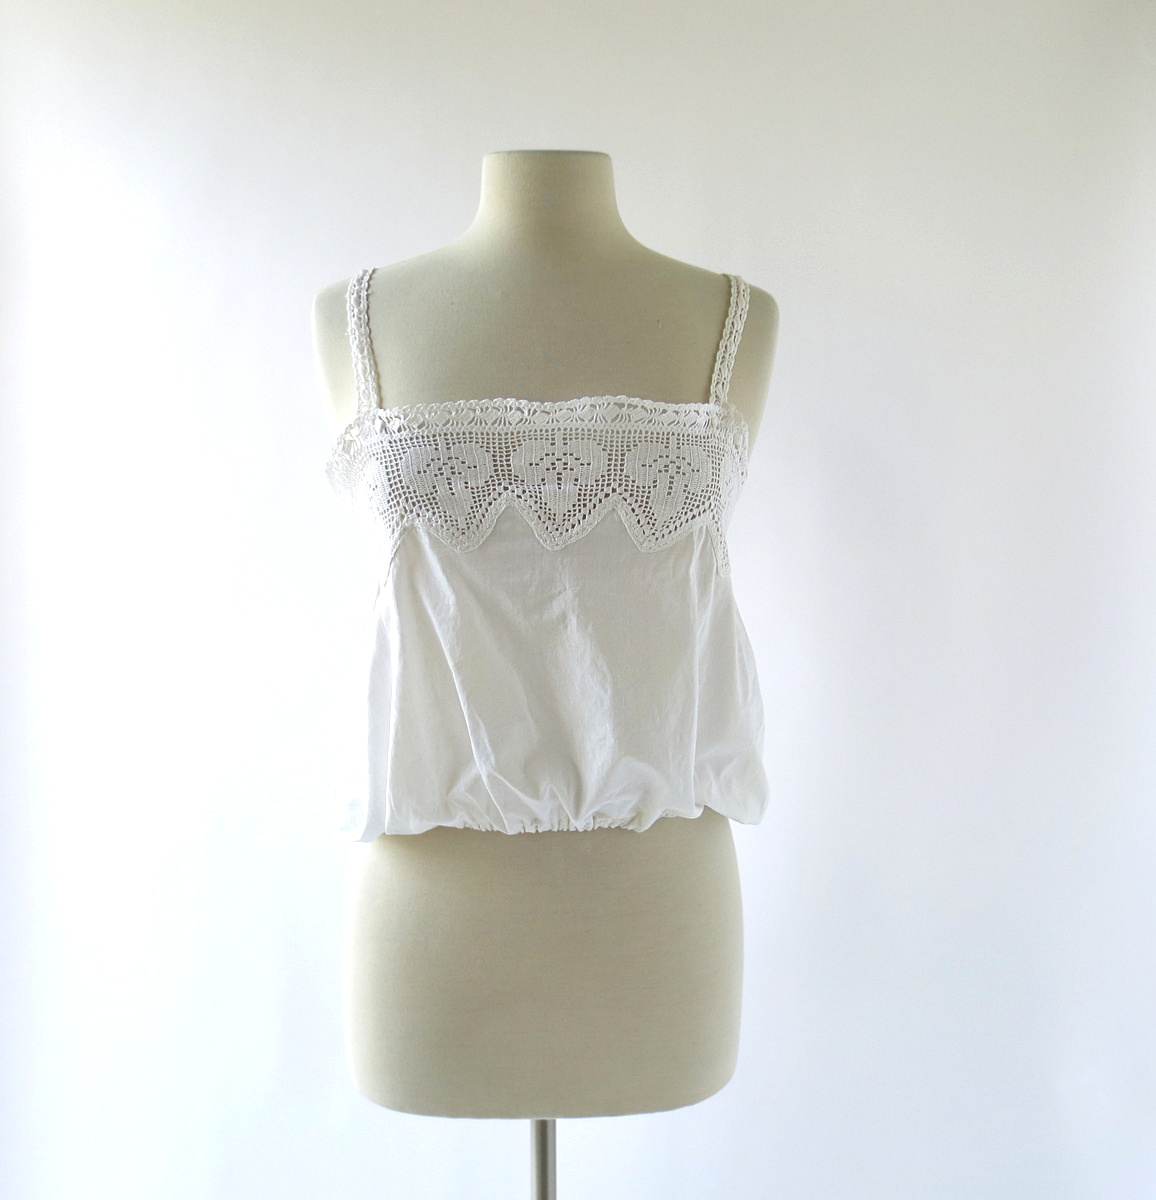 small earth vintage: shop preview: 1920s lingerie, maxis from the 40s ...